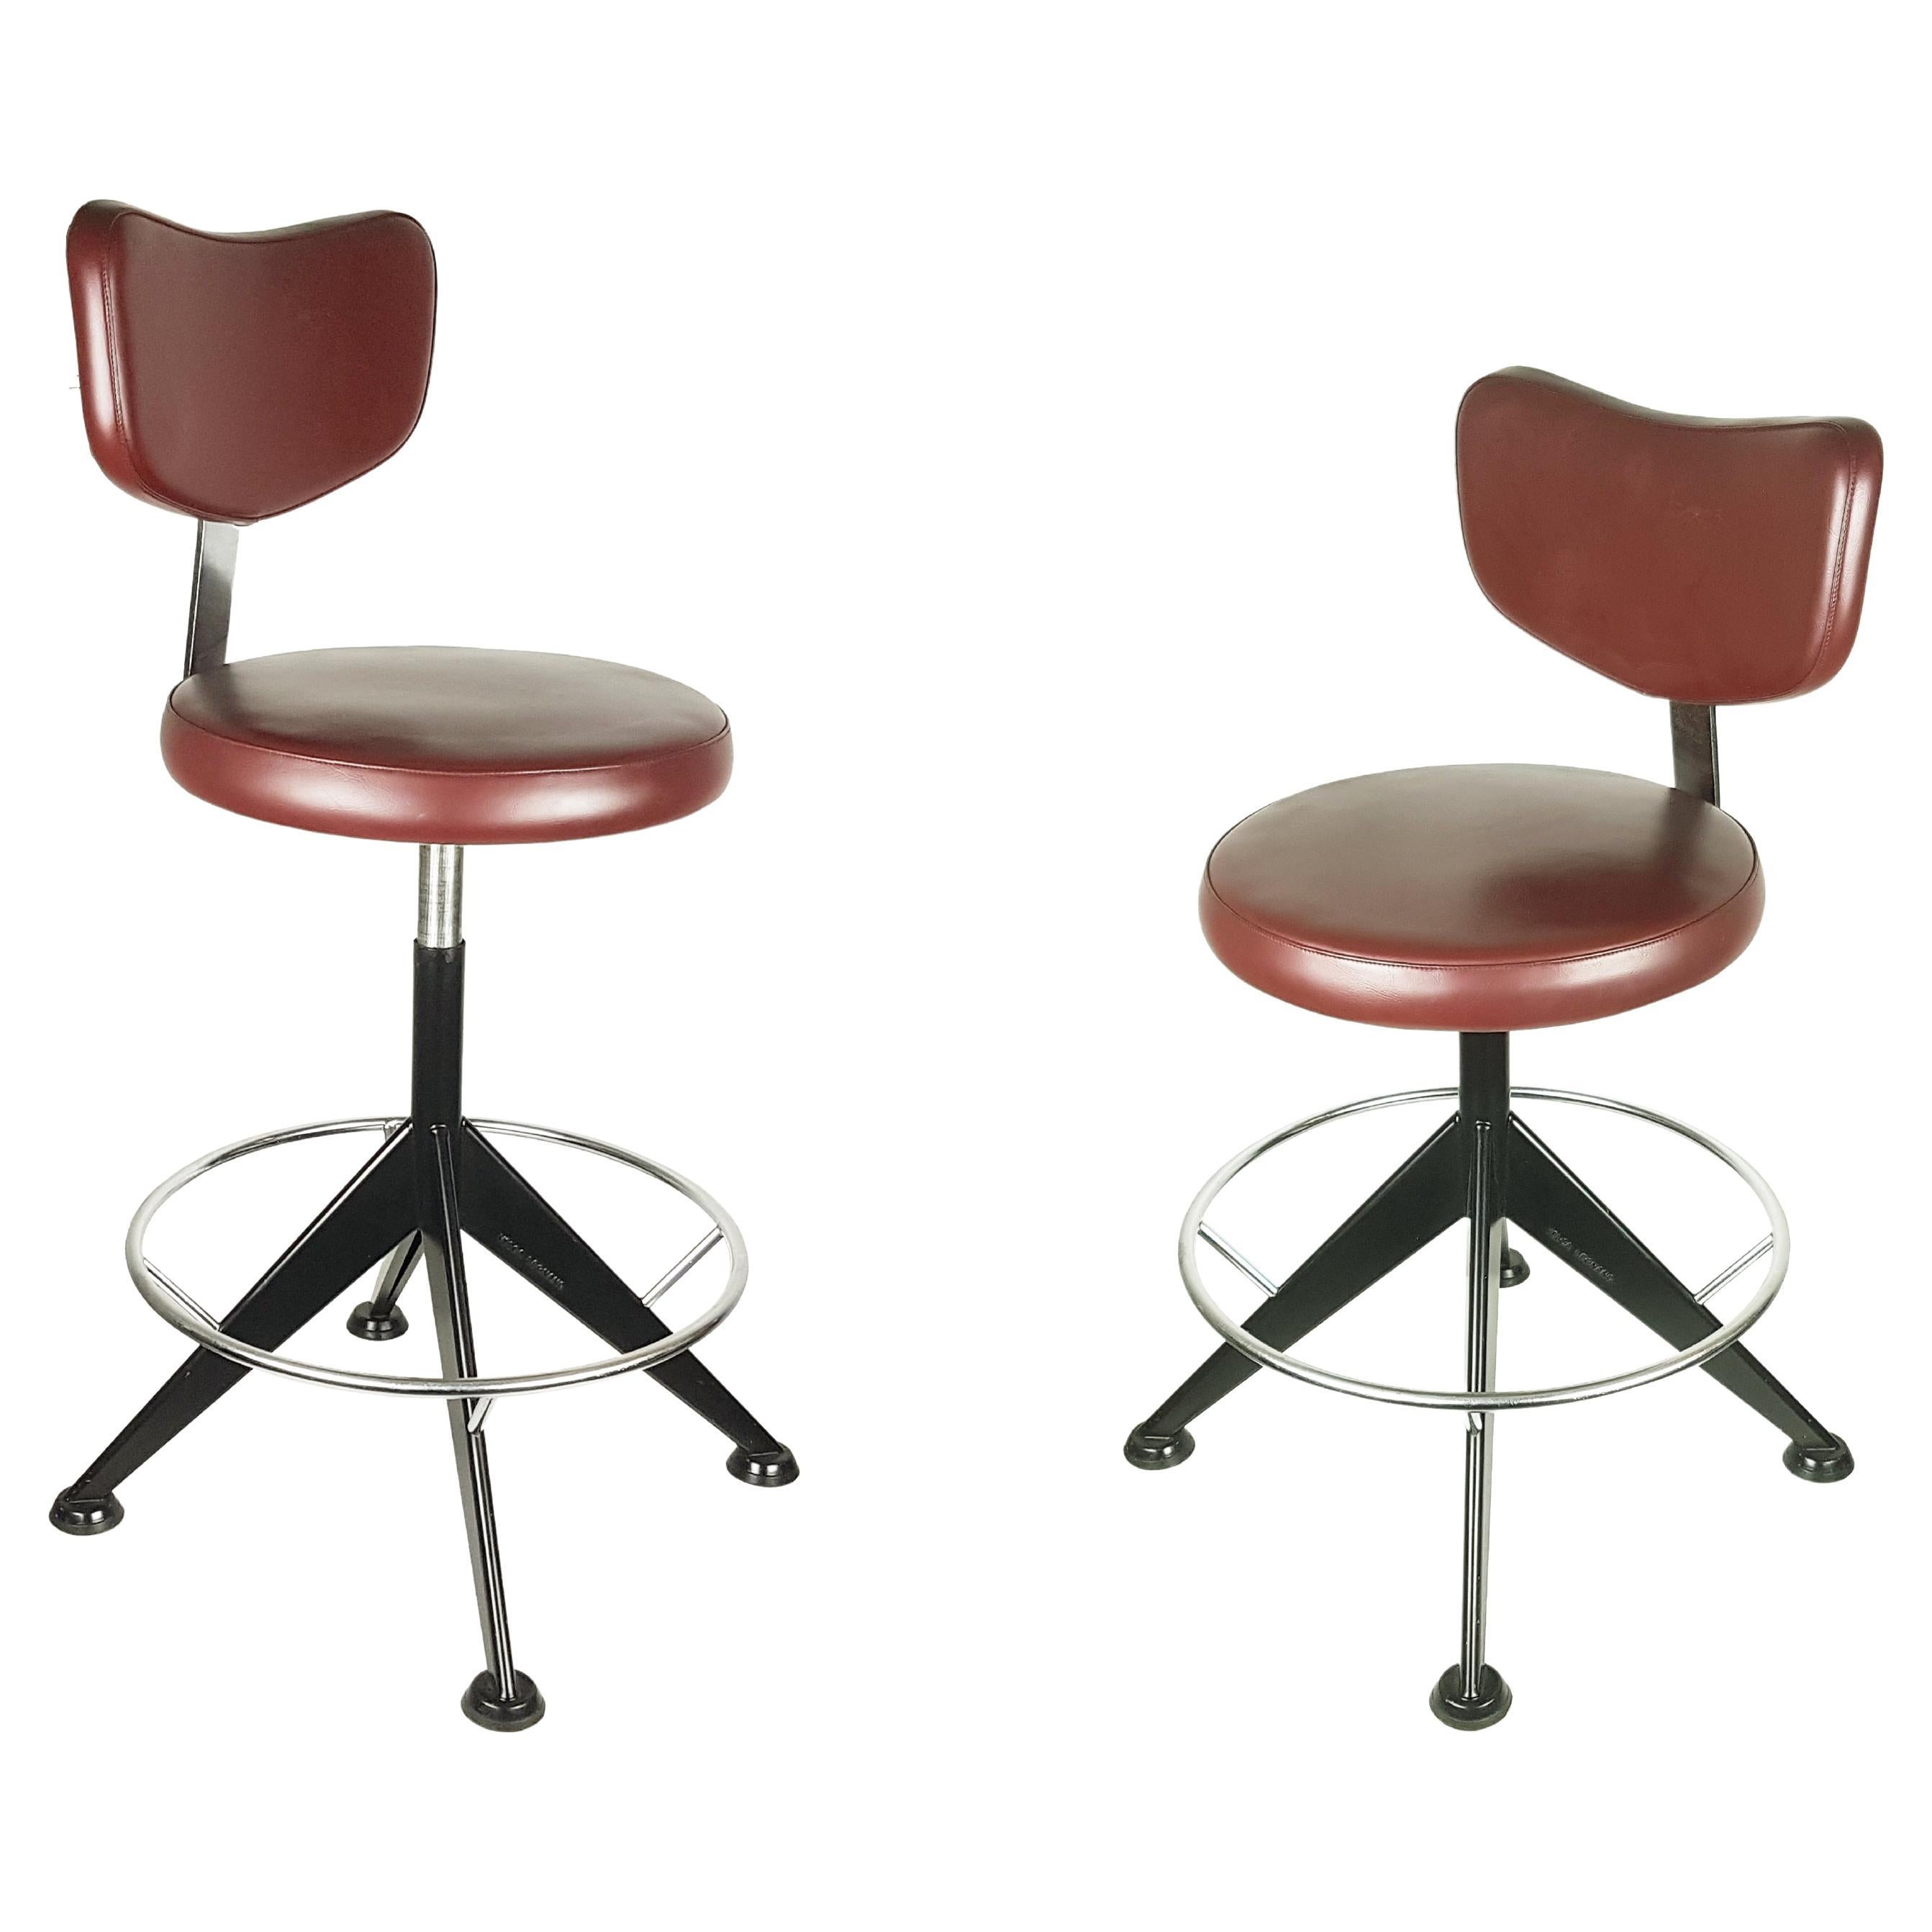 Chrome Plated & Black Metal Burgundy Skay 1960/70s Stools by Velca For Sale